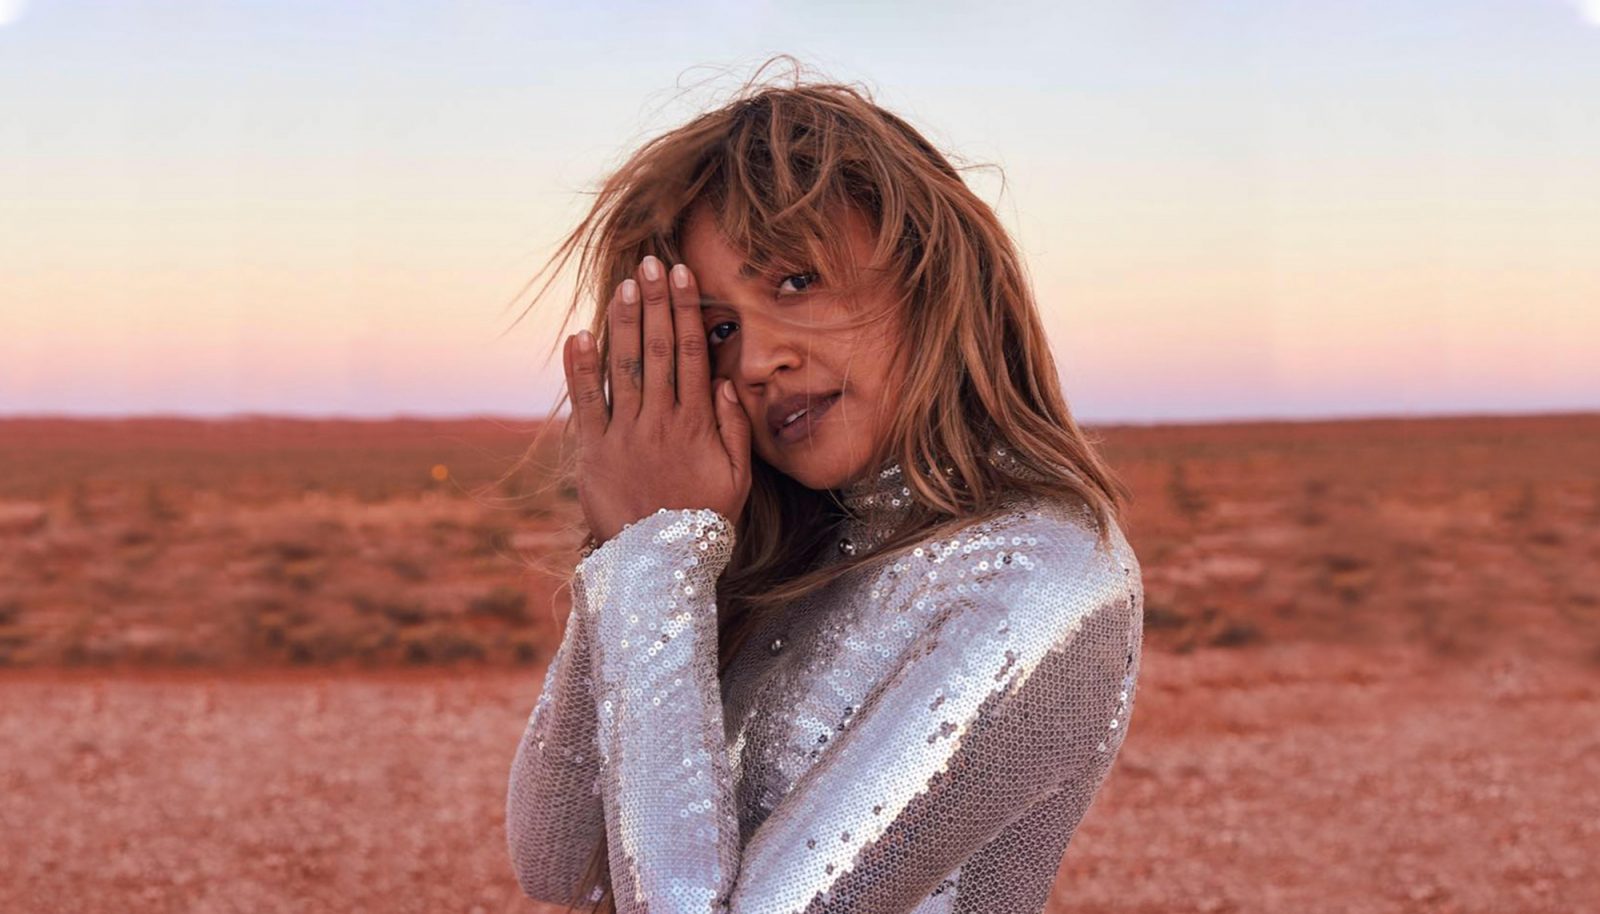 SOTD: Jessica Mauboy welcomes in the weekend on new song ‘Sunday’